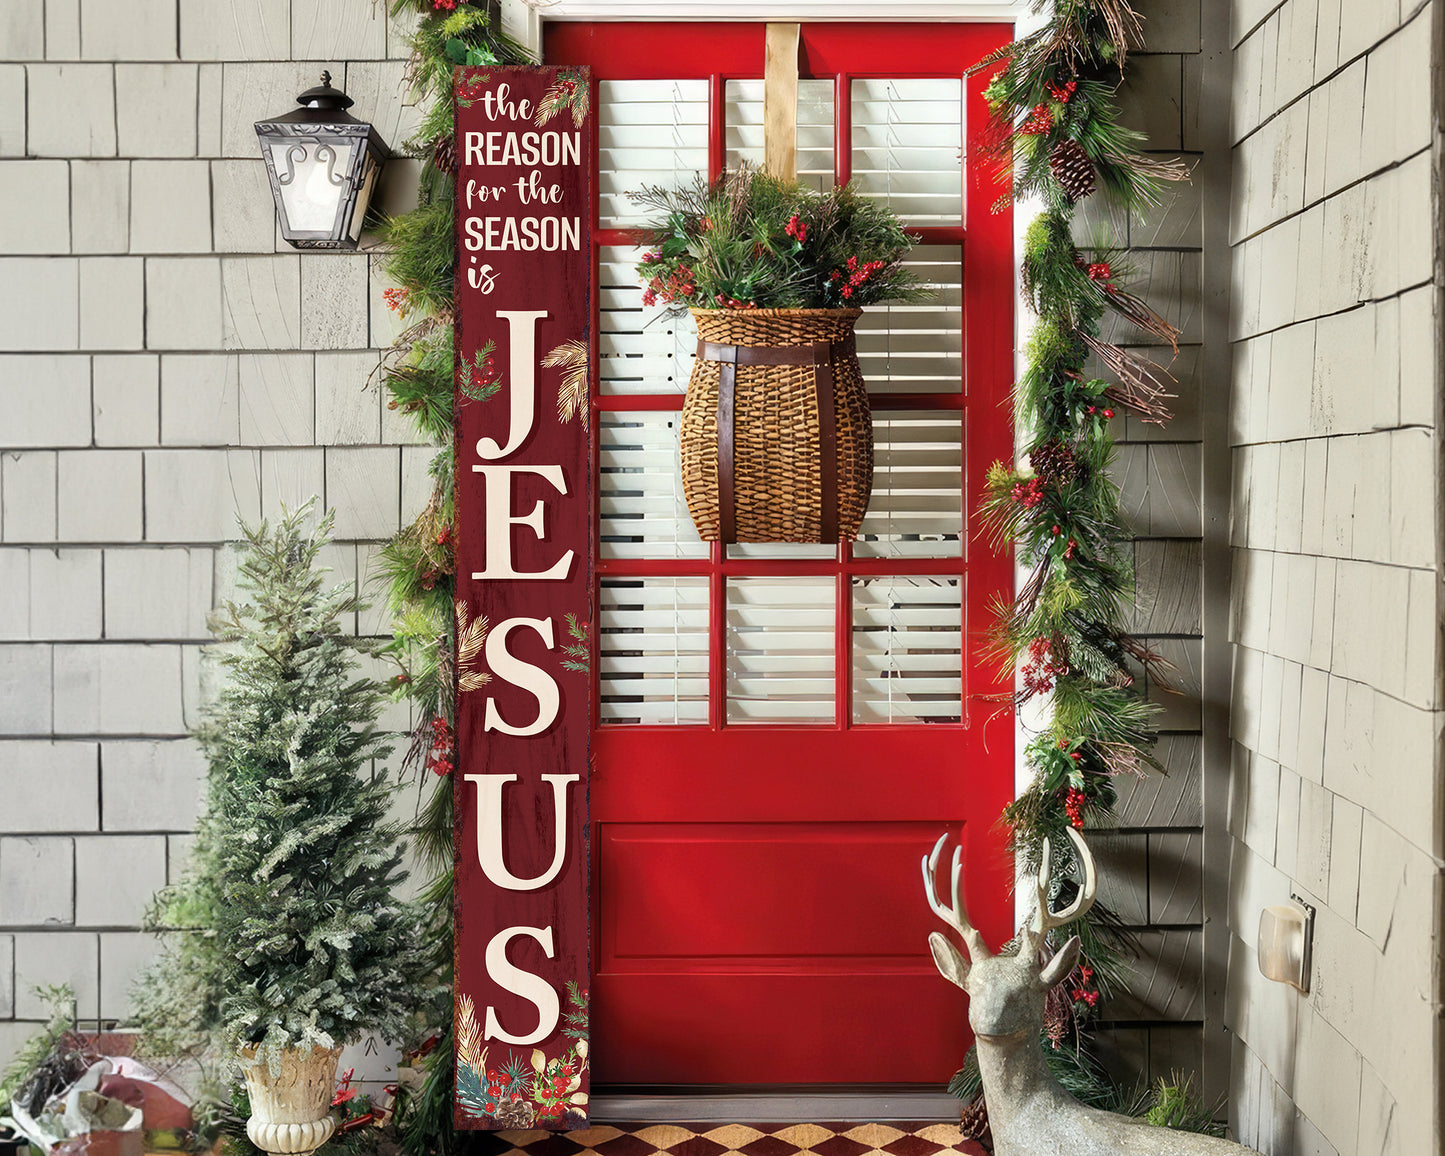 Modern Farmhouse Christmas Decor: 72in Jesus Porch Sign, Front Porch Christmas Welcome Sign, Vintage Holiday Decoration